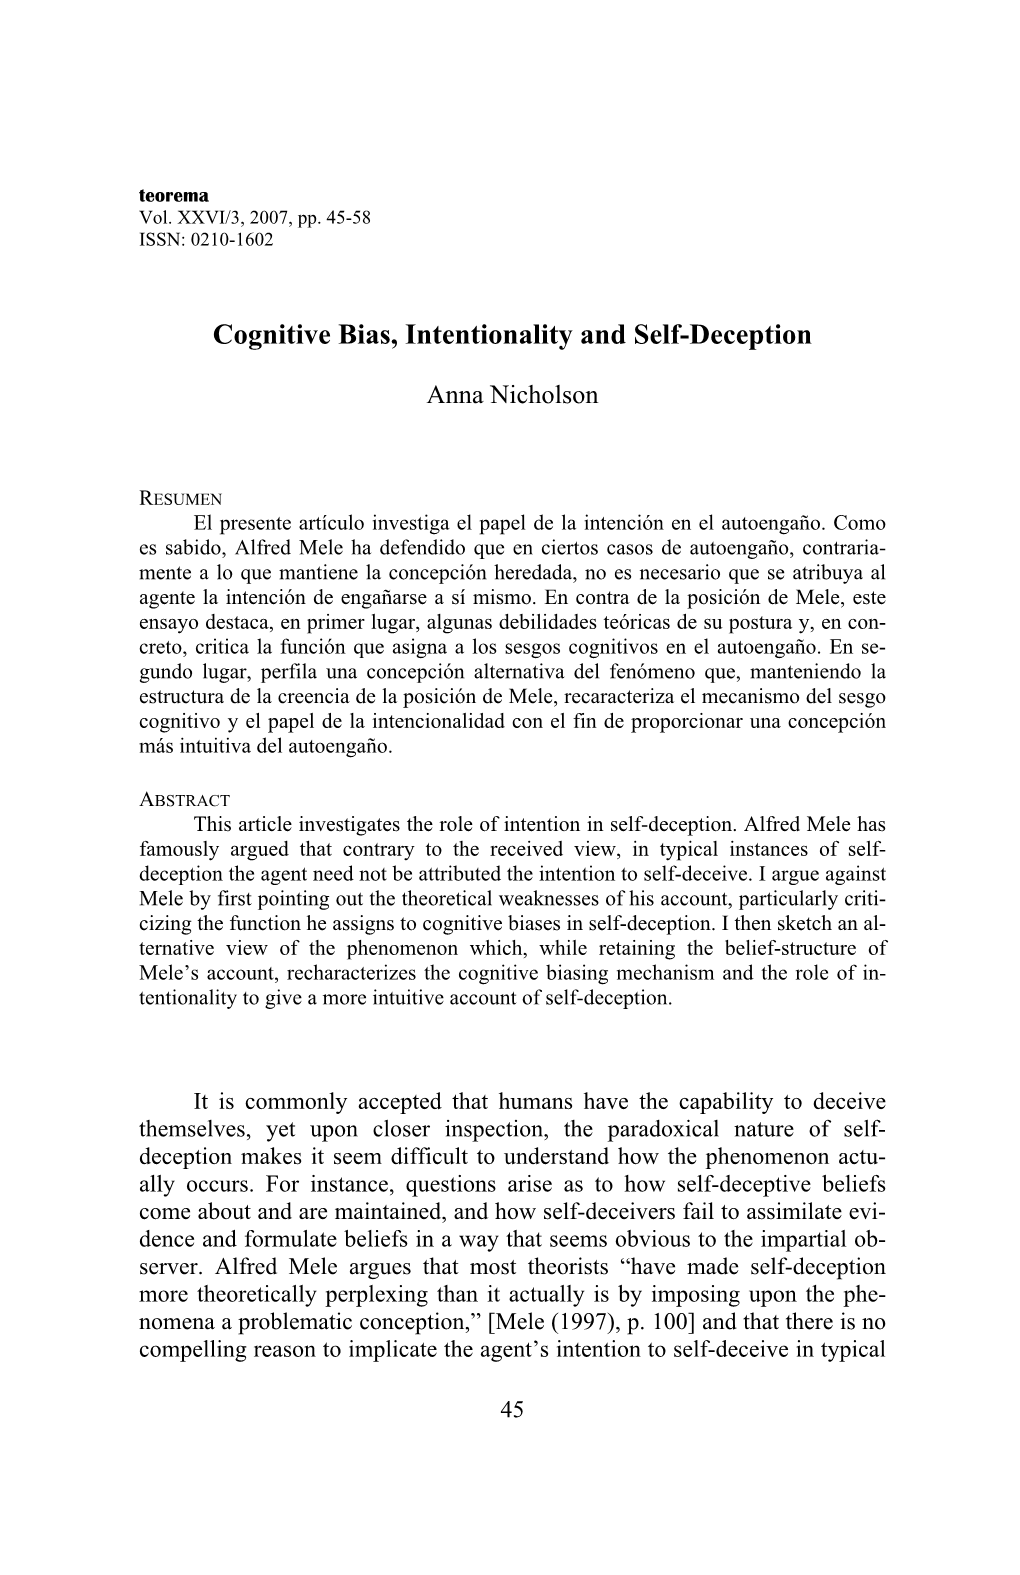 Cognitive Bias, Intentionality and Self-Deception